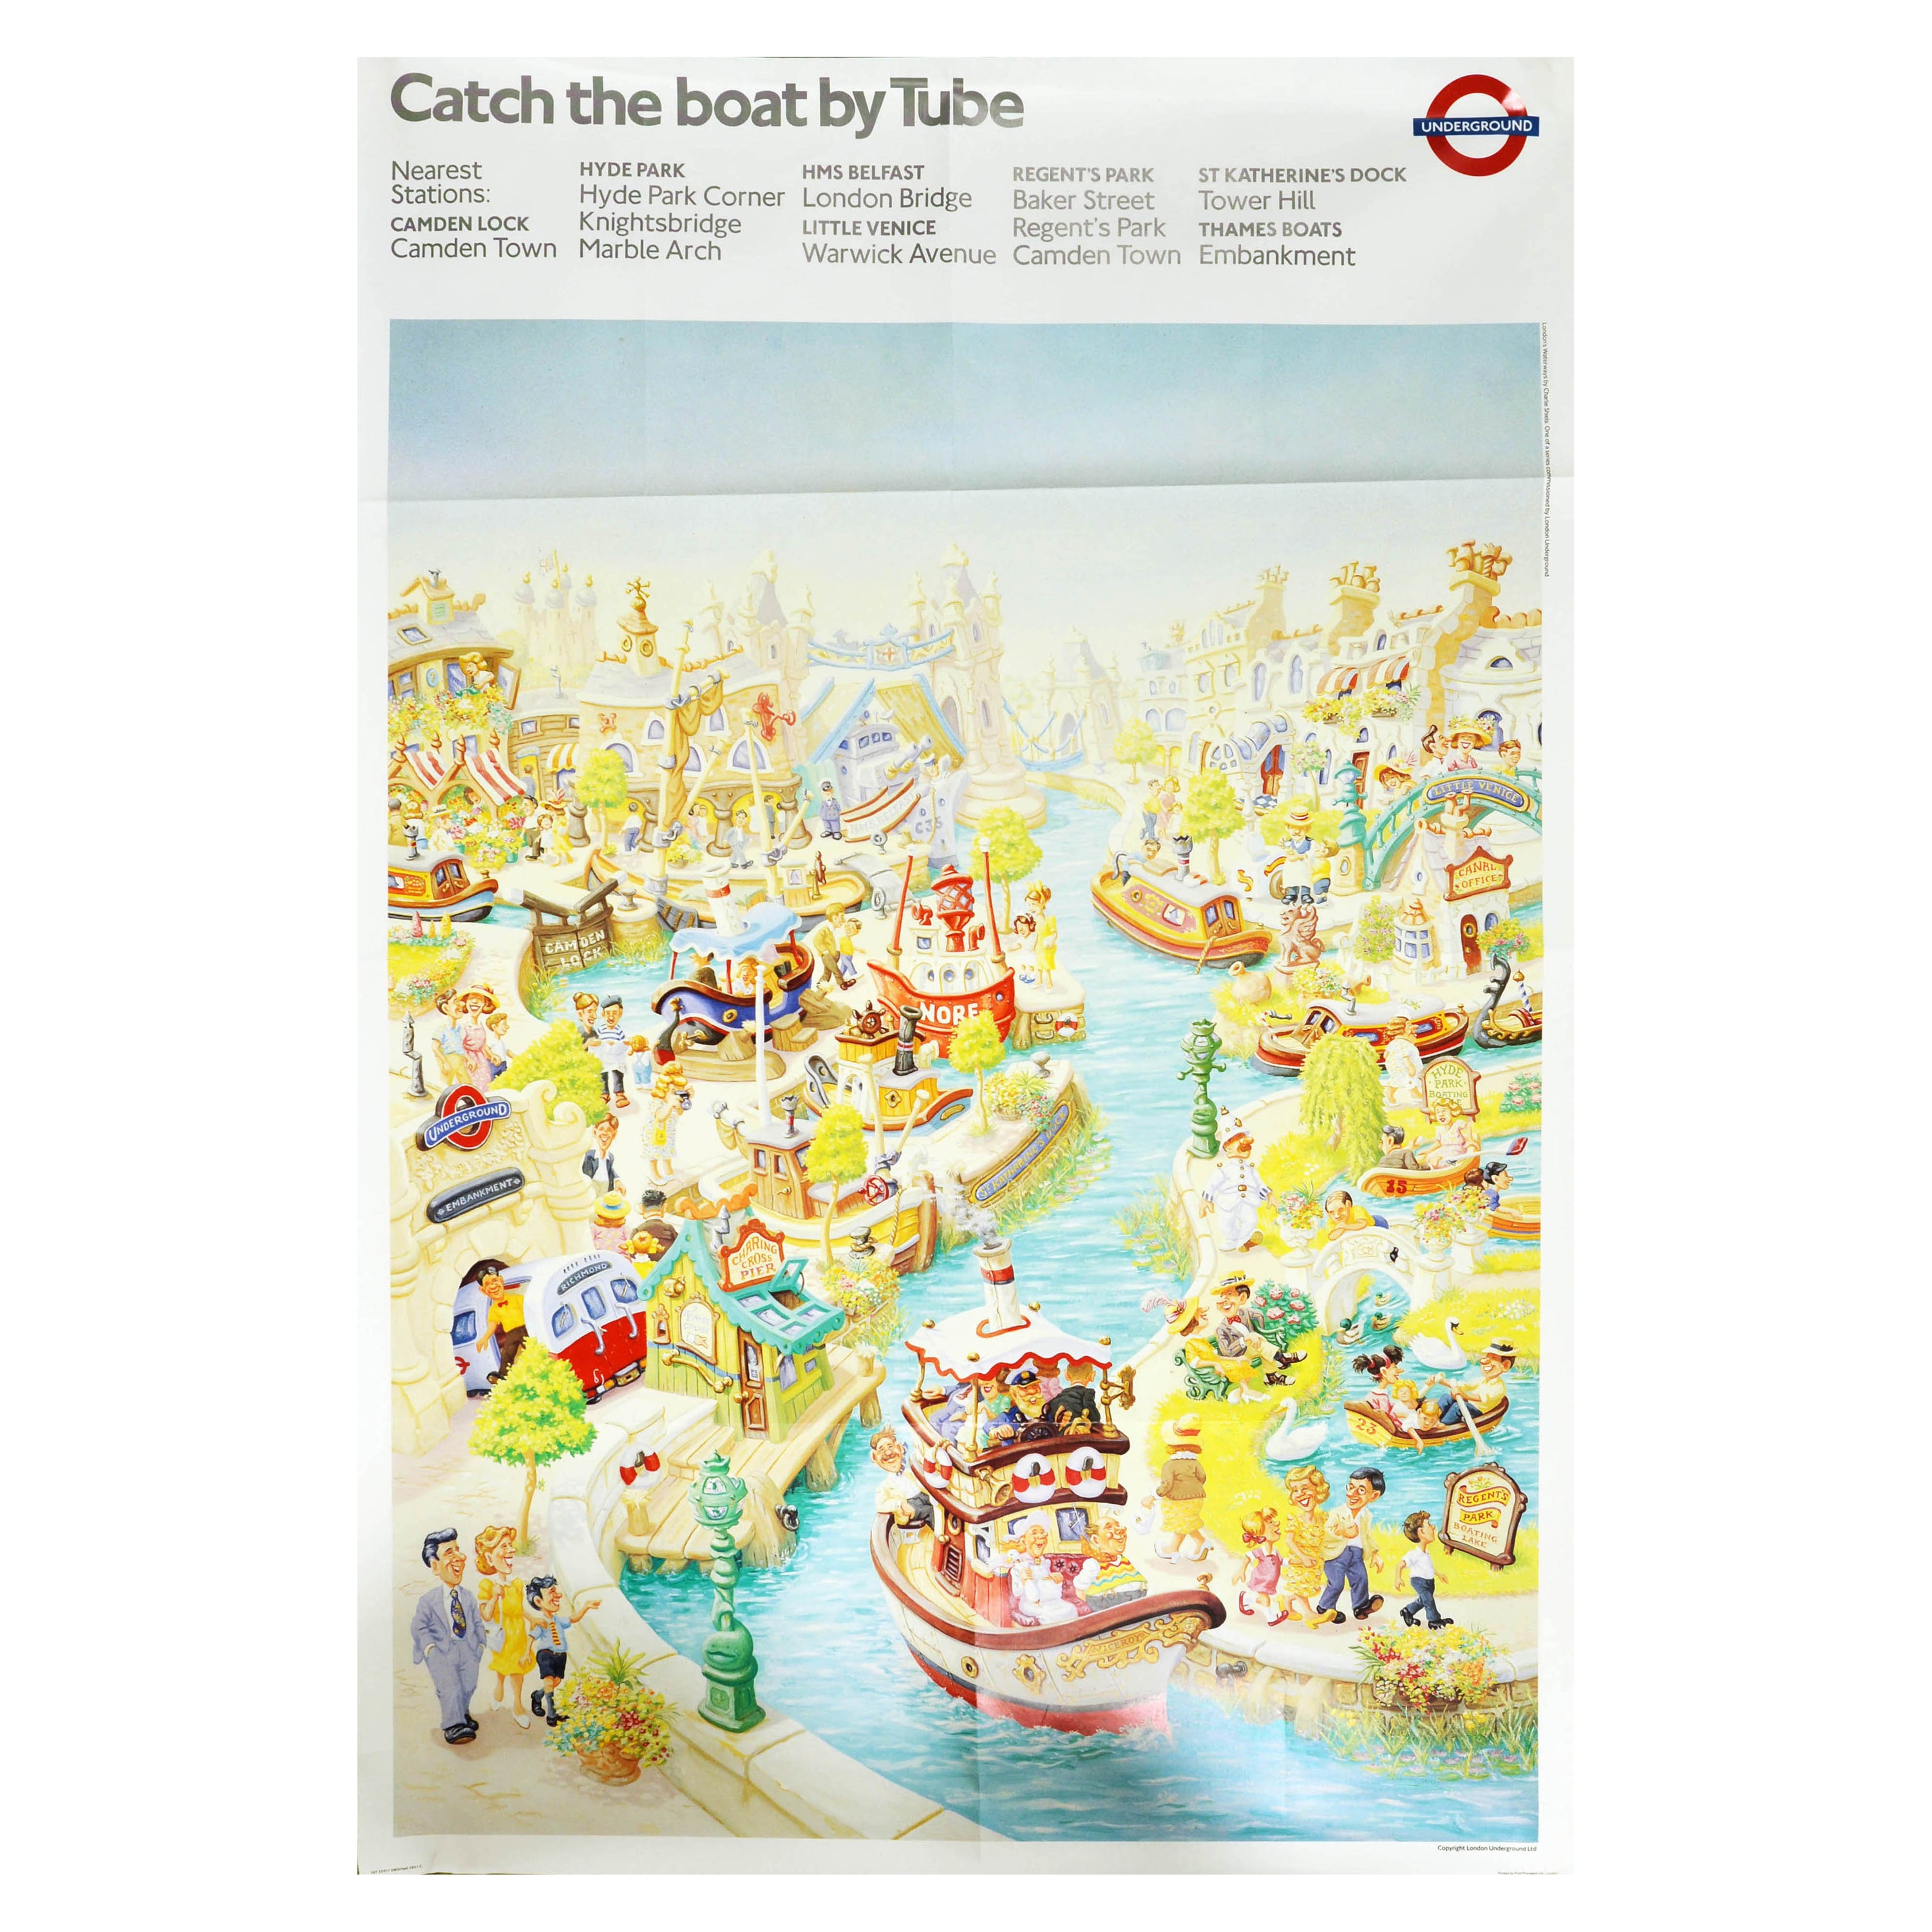 Original Vintage London Underground Poster Catch The Boat By Tube Thames Design